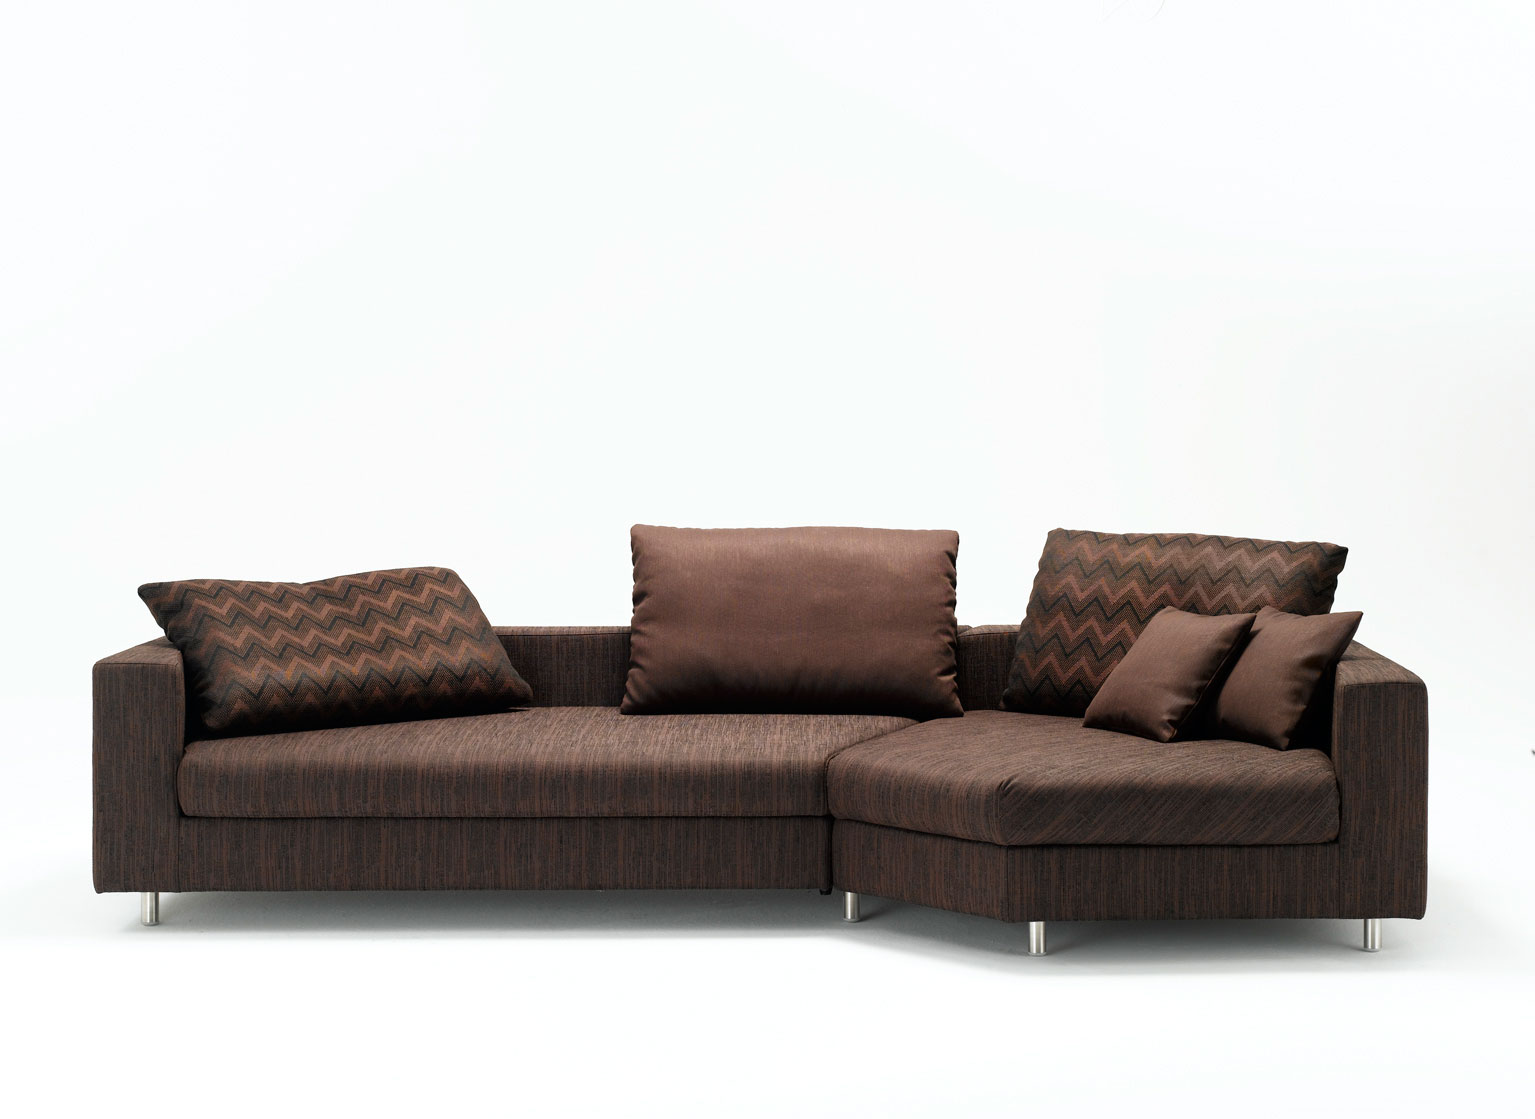 Rolf Benz Brown Adorable Rolf Benz Sofa In Brown With Unique Patterned Cushions Made From Fabric Material Finished In Modern Shaped Style Decoration Furniture  Rolf Benz Sofa Firms Innovation 